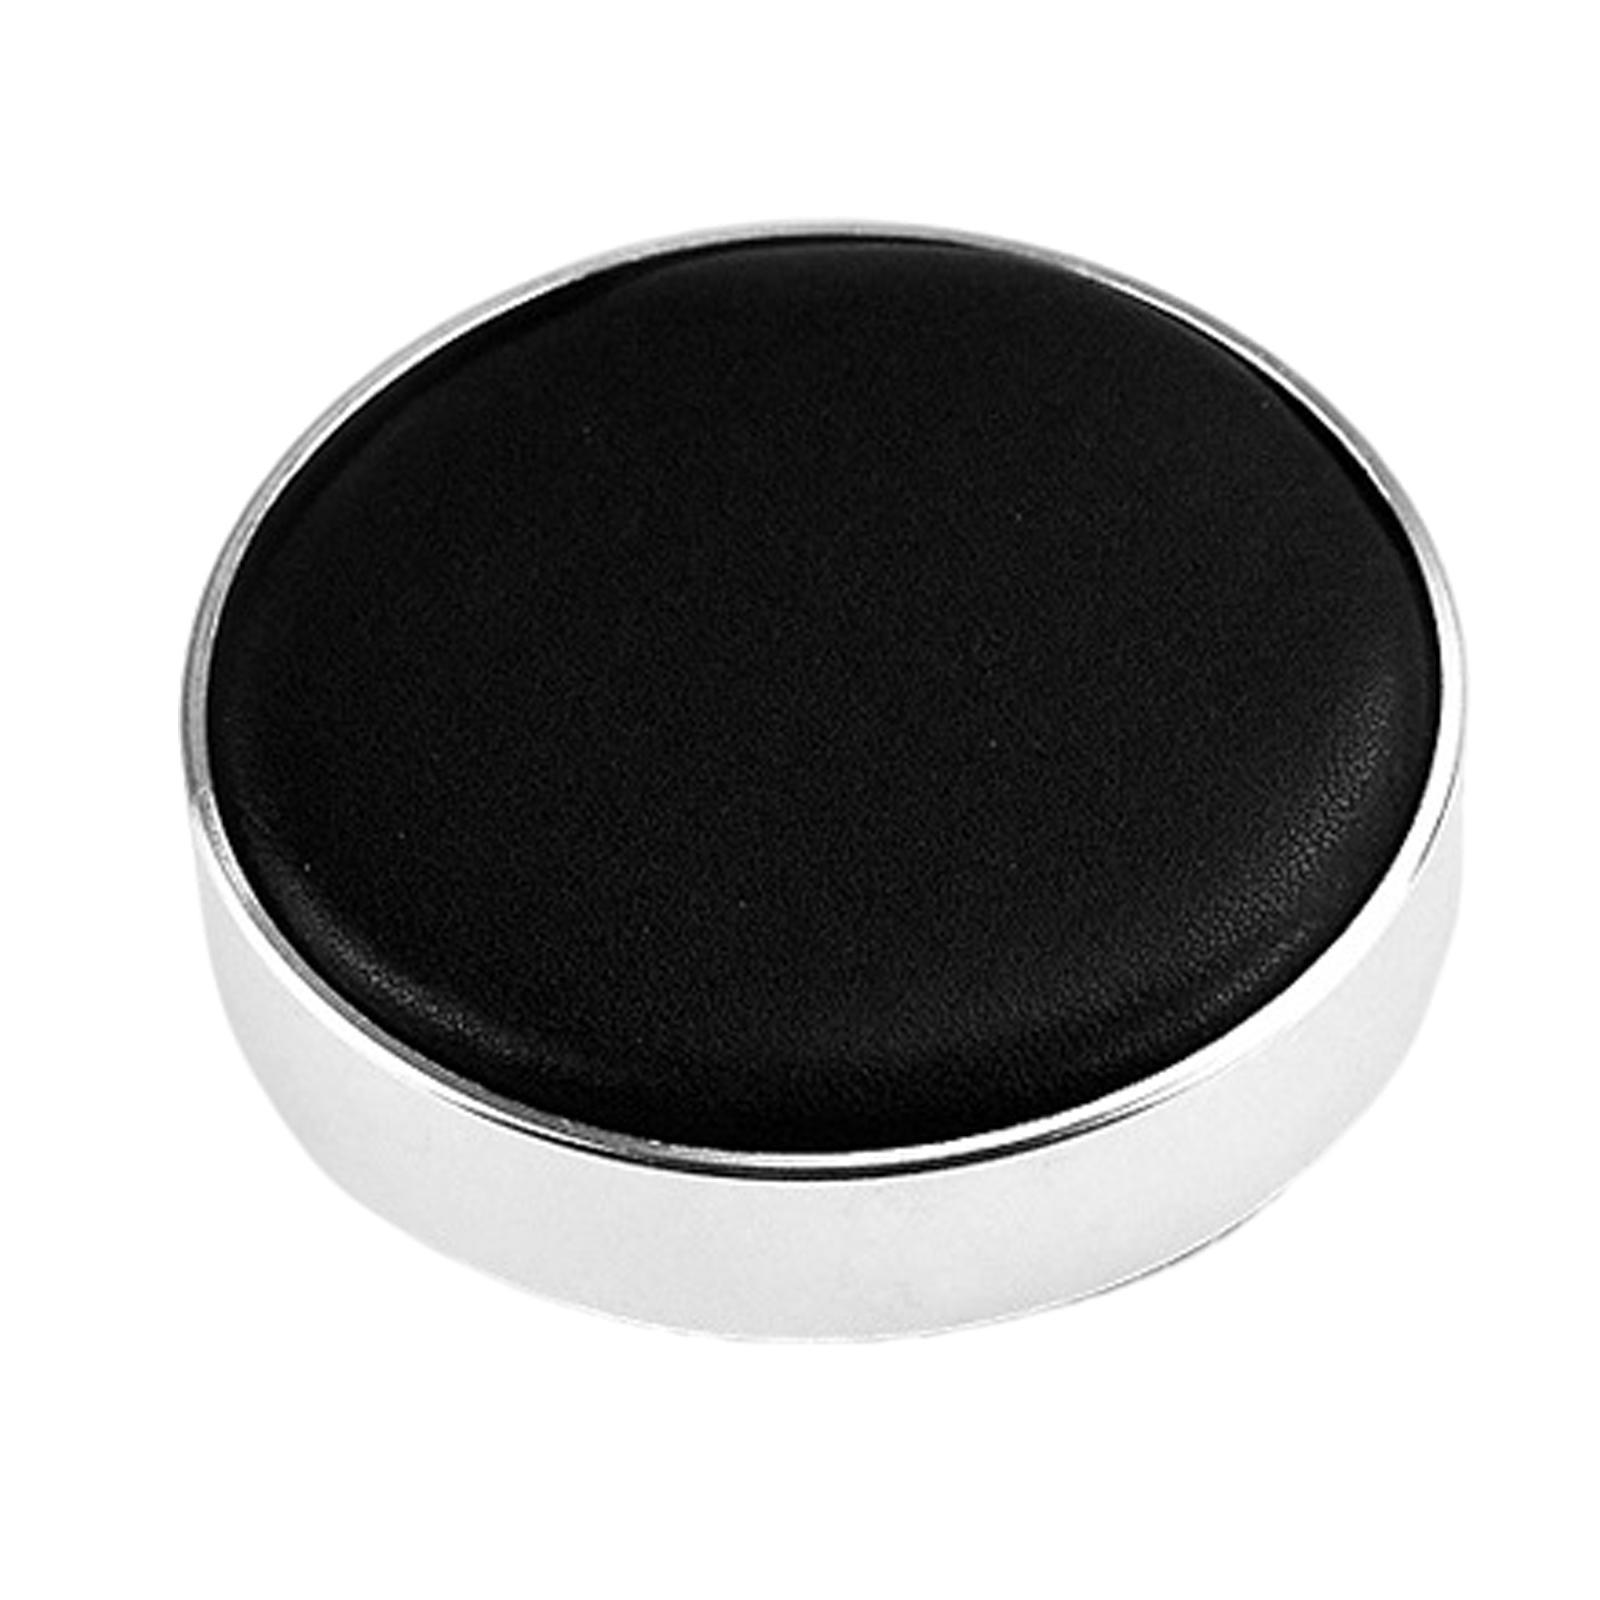 Watch Casing Cushion Holder Repair Tool Scratch-Proof Black for Watchmaker